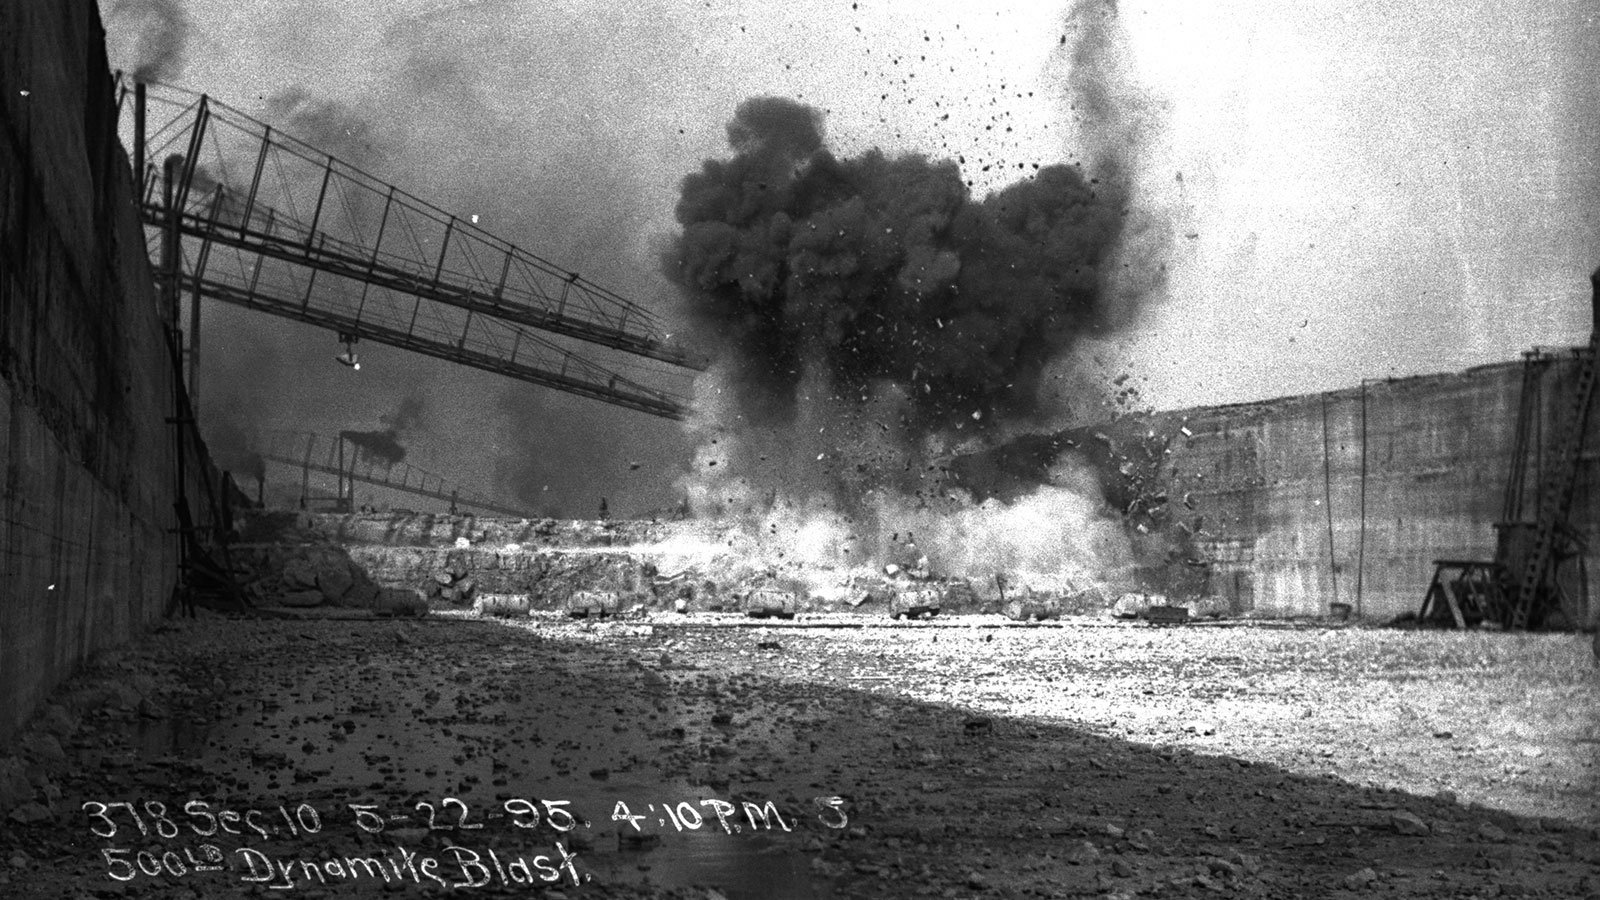 Dynamite blasting through bedrock during the construction of the Chicago Sanitary and Ship Canal on May 22, 1895